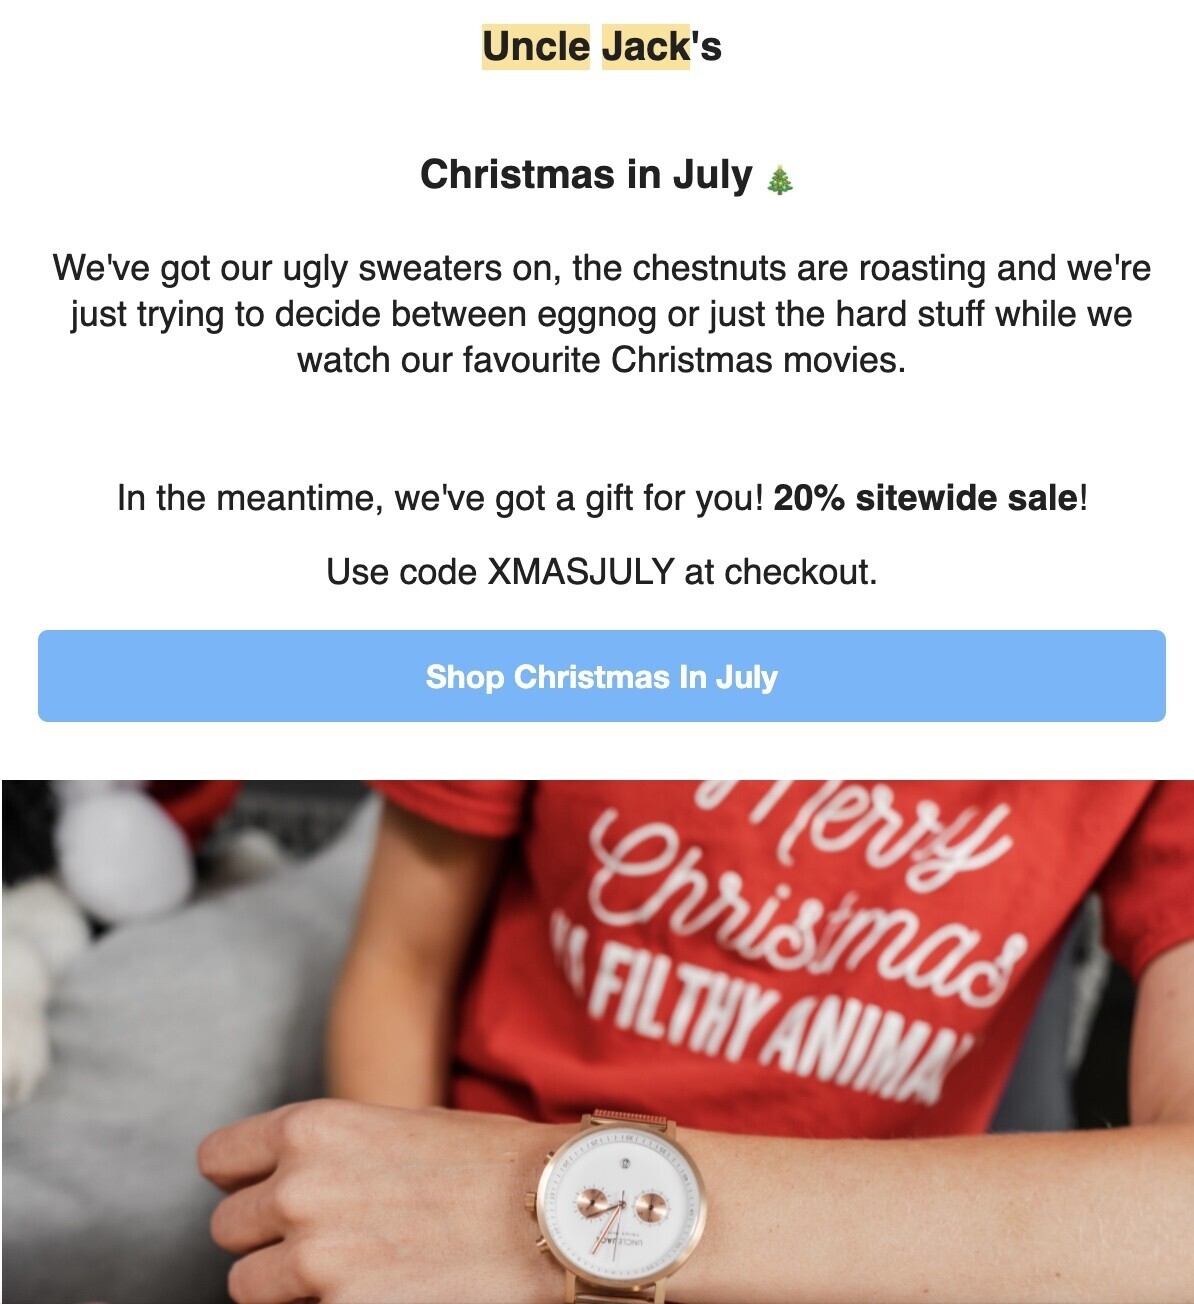 Uncle Jack’s “Christmas in July” discount